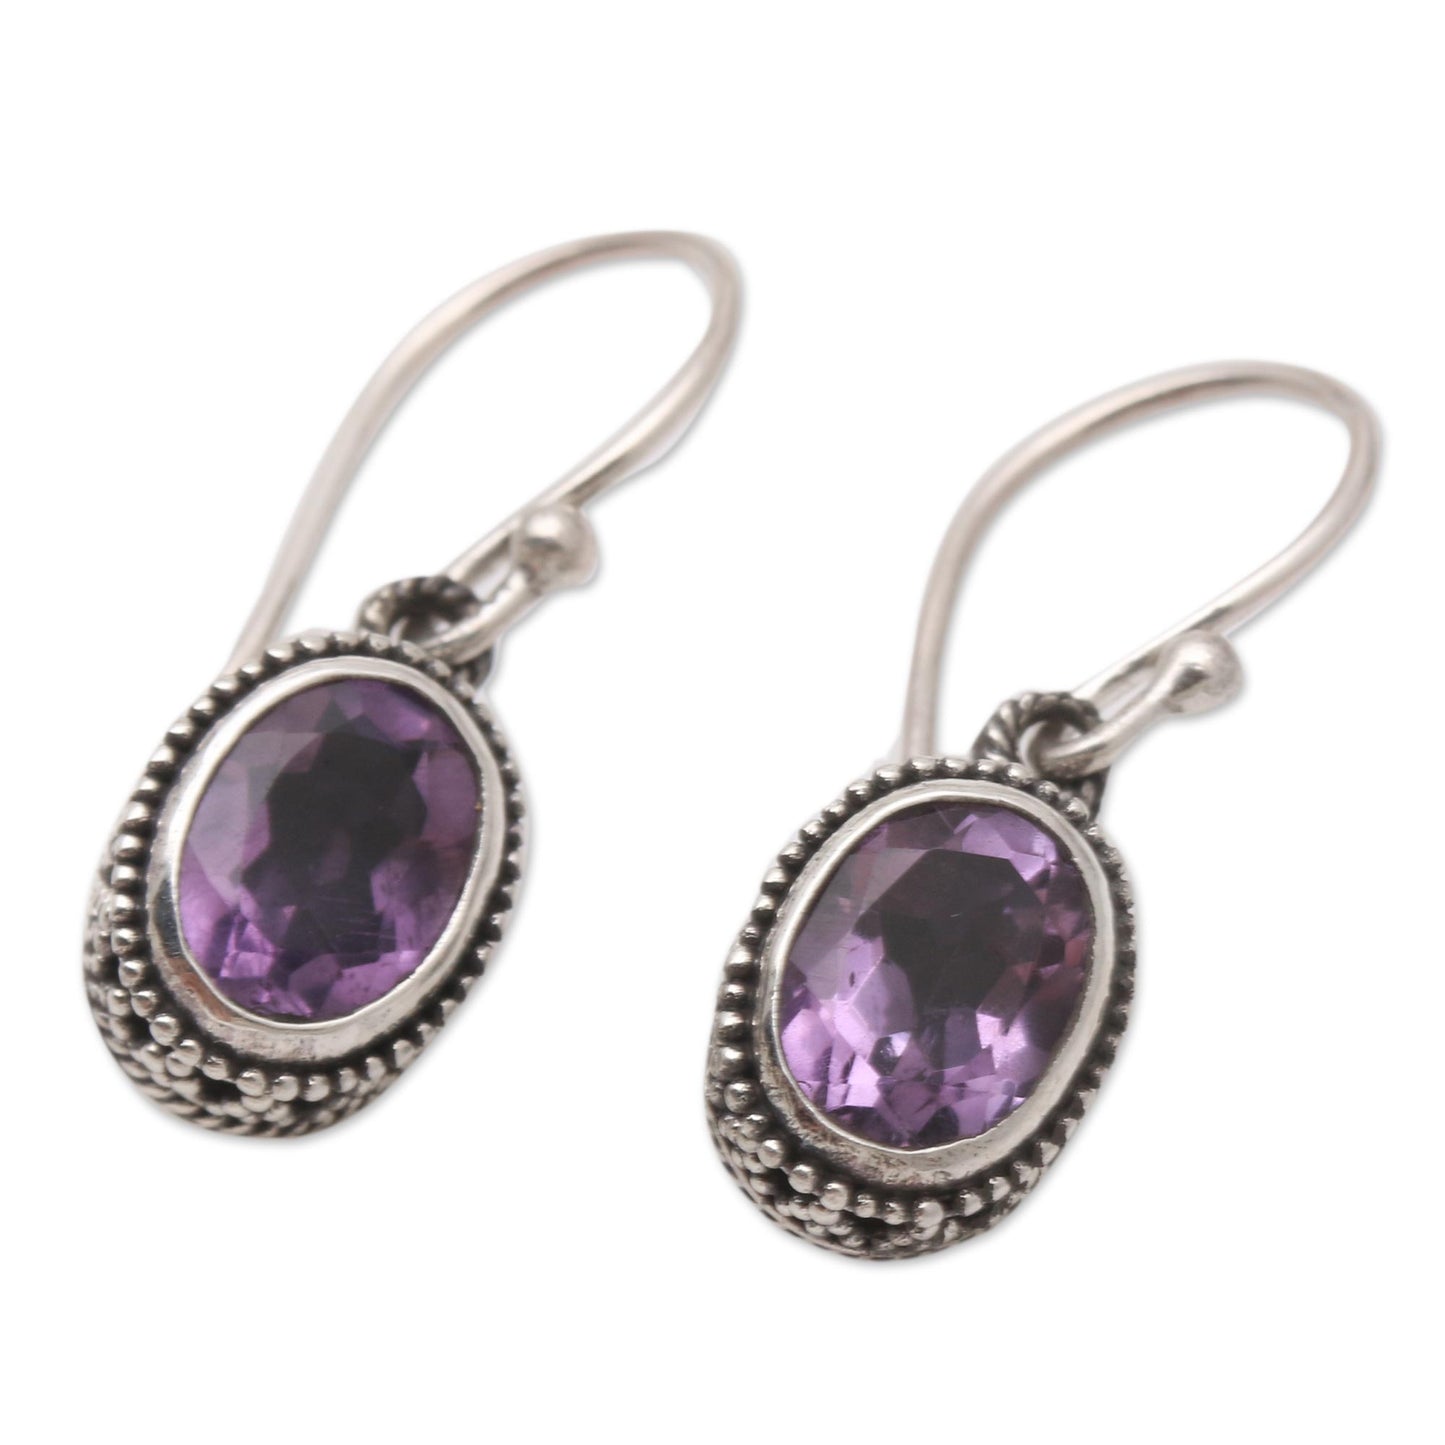 Soft Music in Purple Hand Made Sterling Silver and Amethyst Dangle Earrings